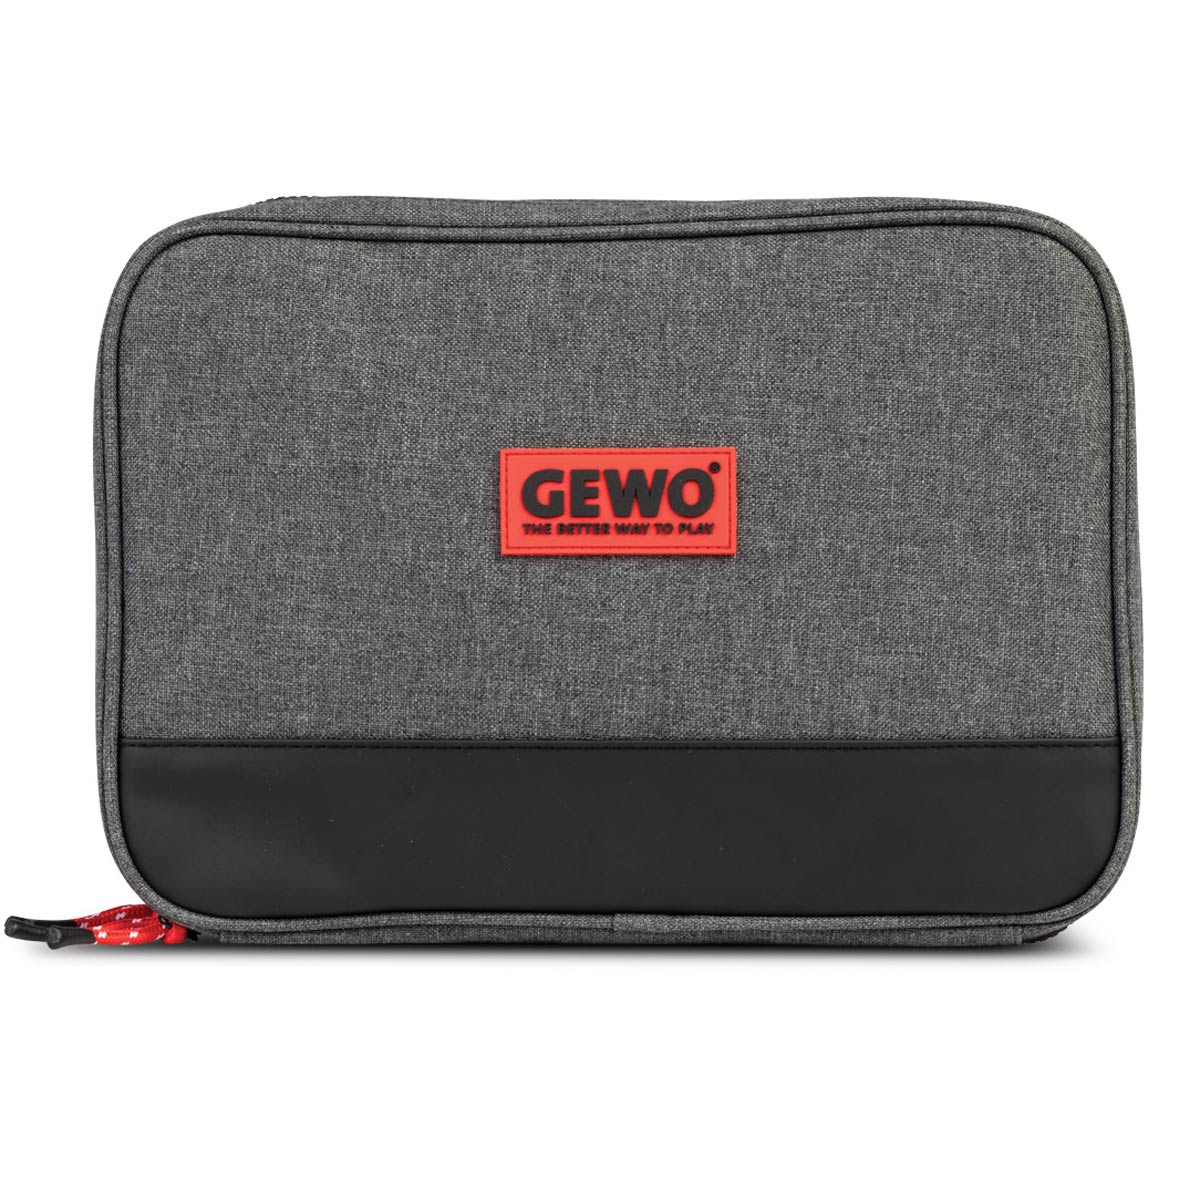 GEWO Double Cover Spy grey/red